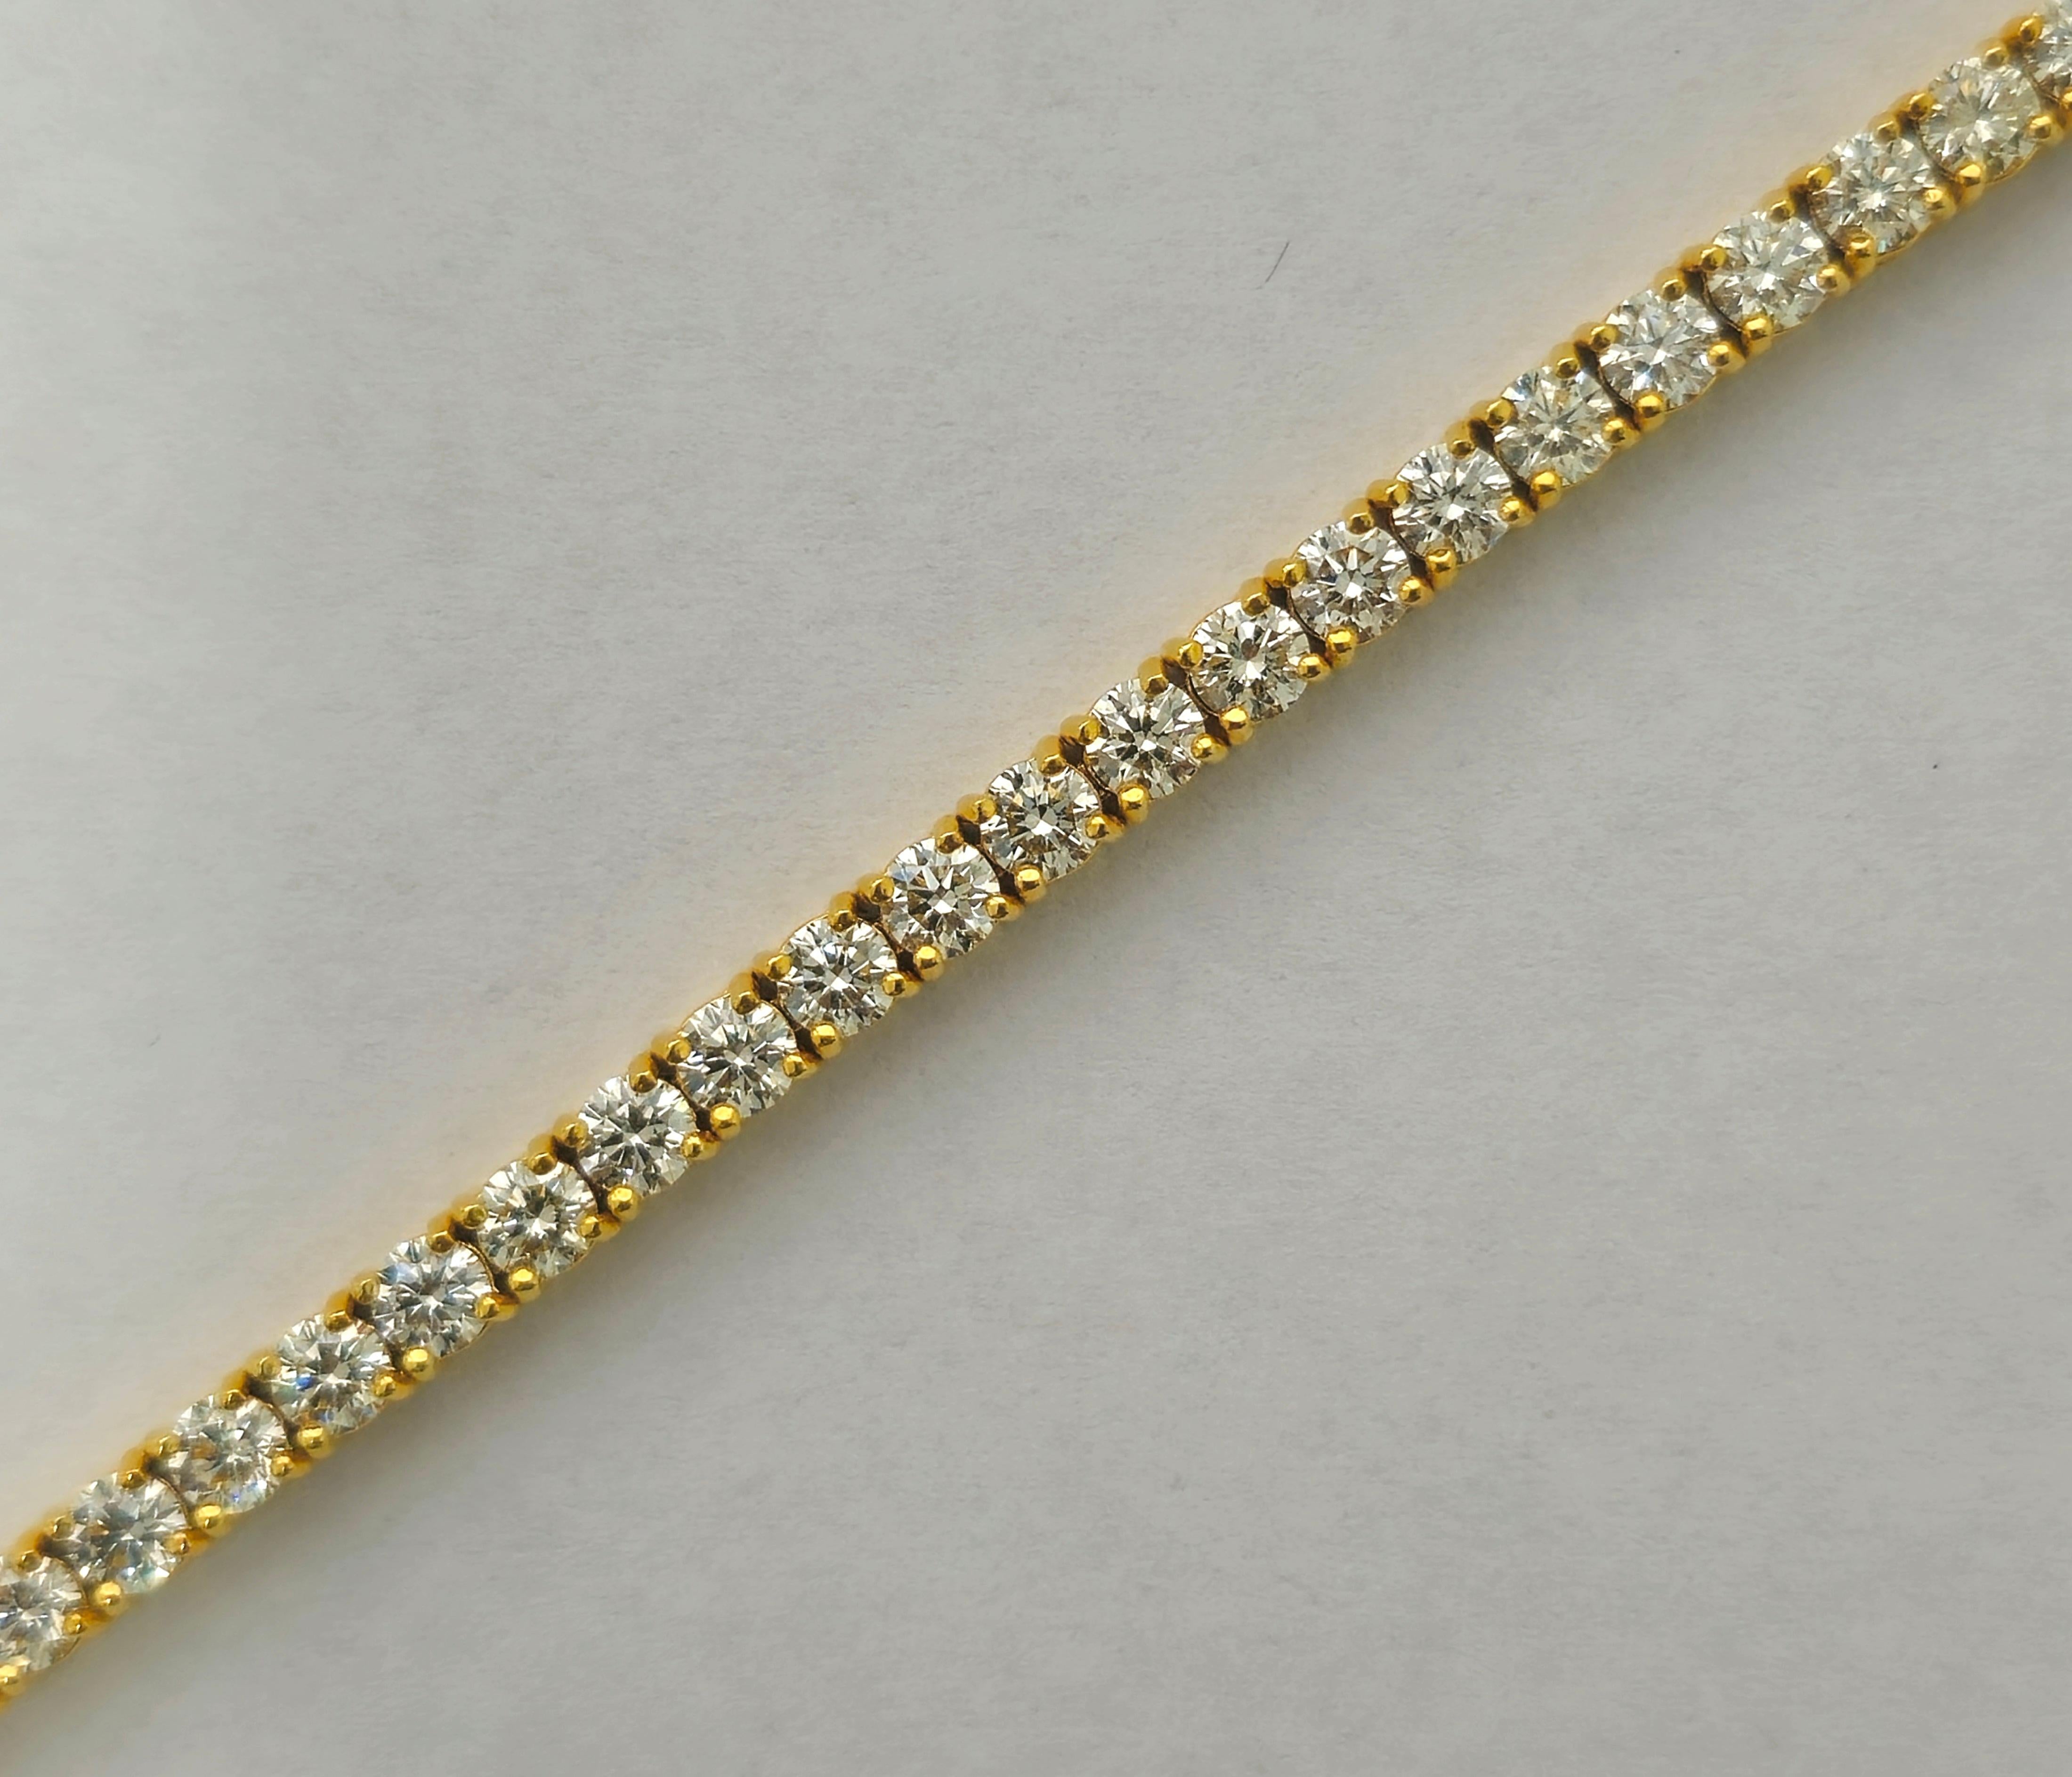 Indulge in luxury with our Unisex Tennis Bracelet, a radiant symbol of sophistication. Crafted from exquisite yellow gold and adorned with a dazzling array of round brilliant cut diamonds, each boasting exceptional clarity, this bracelet exudes